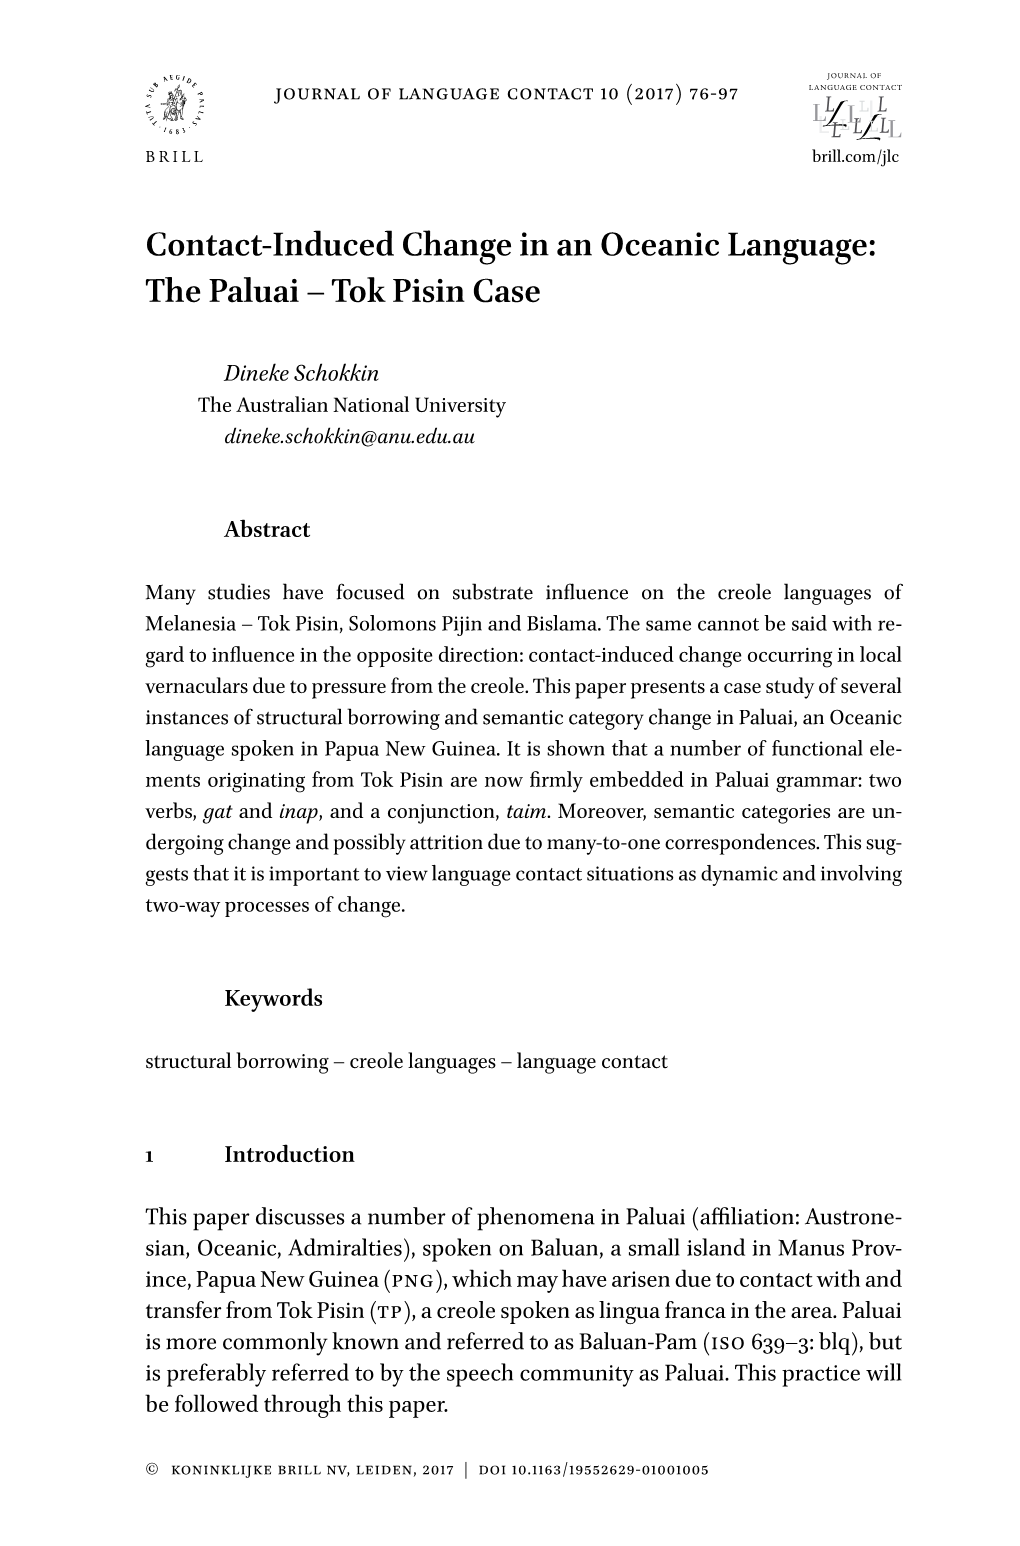 Contact-Induced Change in an Oceanic Language: the Paluai – Tok Pisin Case